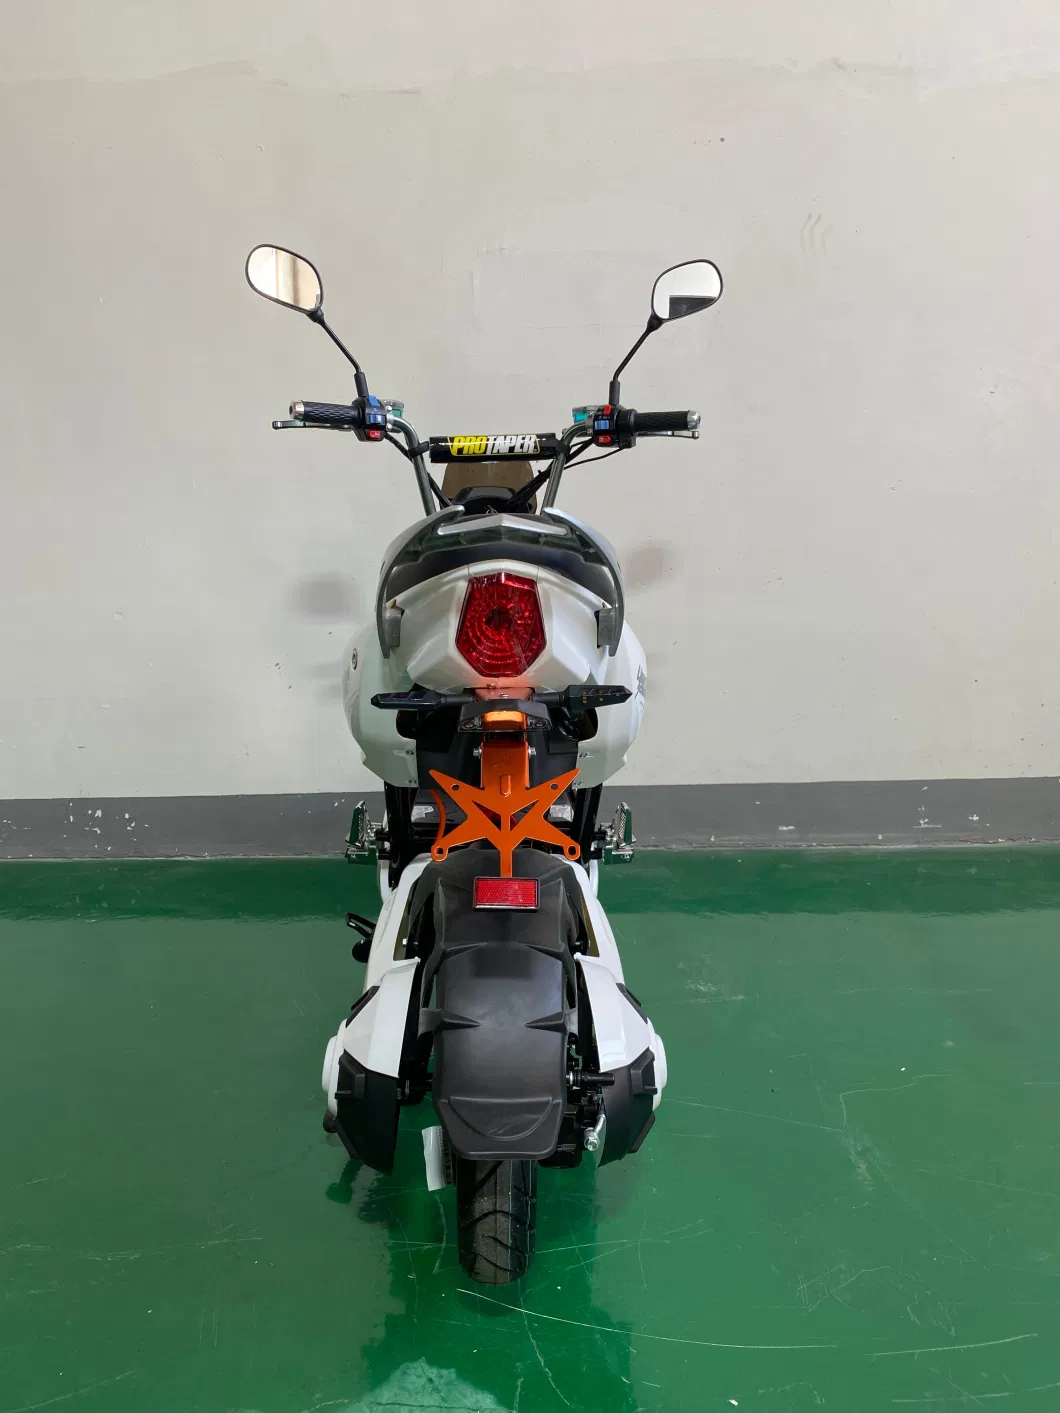 60V1200W Electric Scooter Kk-Xman with 60V20ah Lead-Acid or Lithium Battery